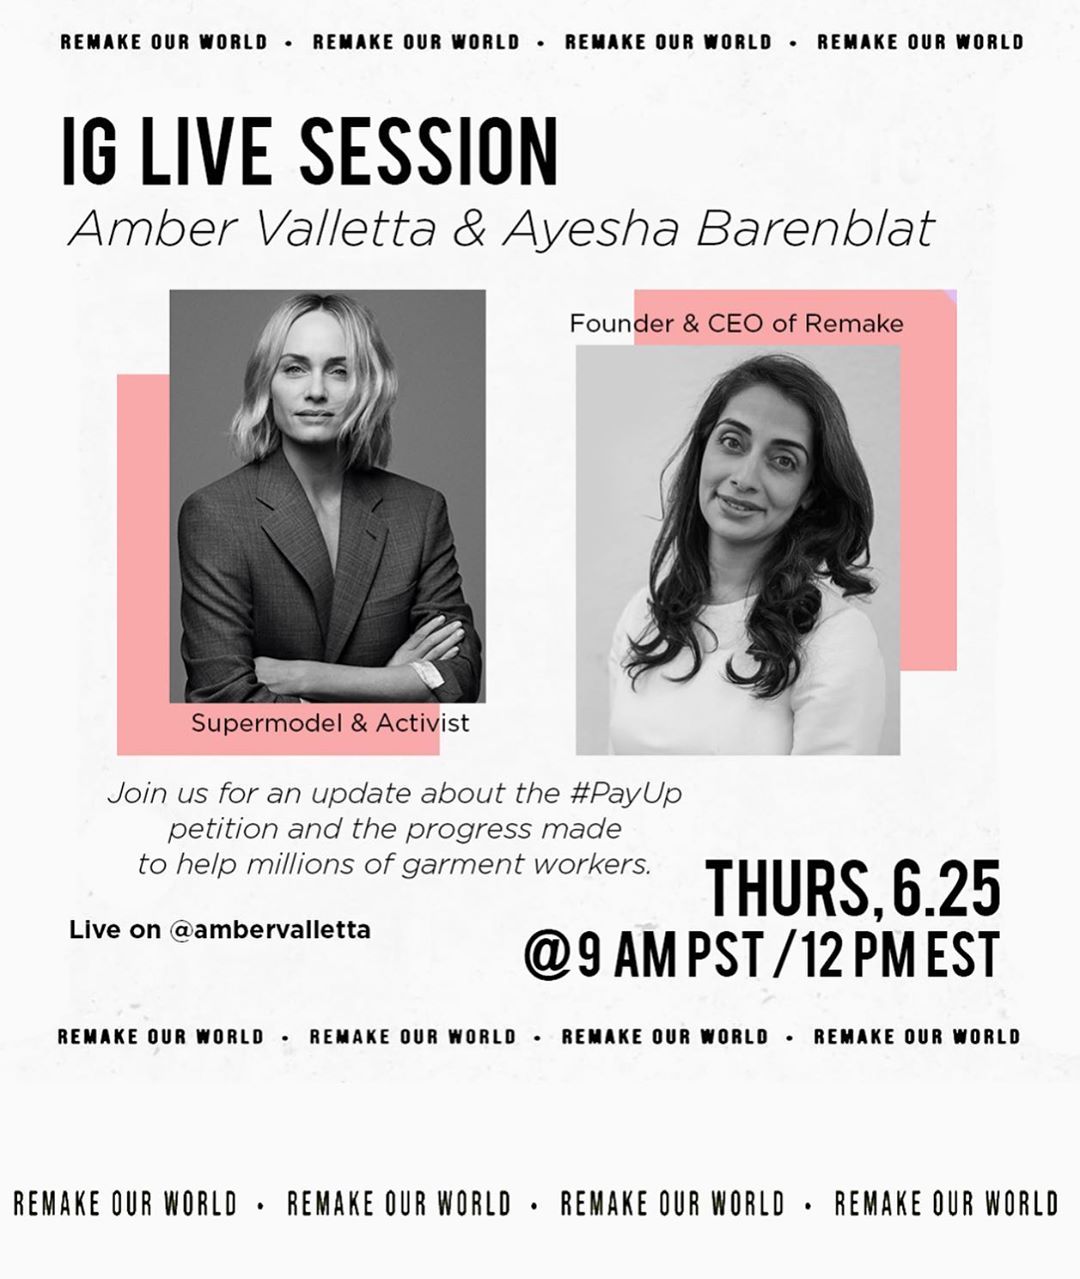 Amber Valletta - Please join me Thursday June 25th (tomorrow) for an important conversation about #payup with Remake’s Founder and CEO Ayesha Barenblat. The incredible work that @remakeourworld has be...